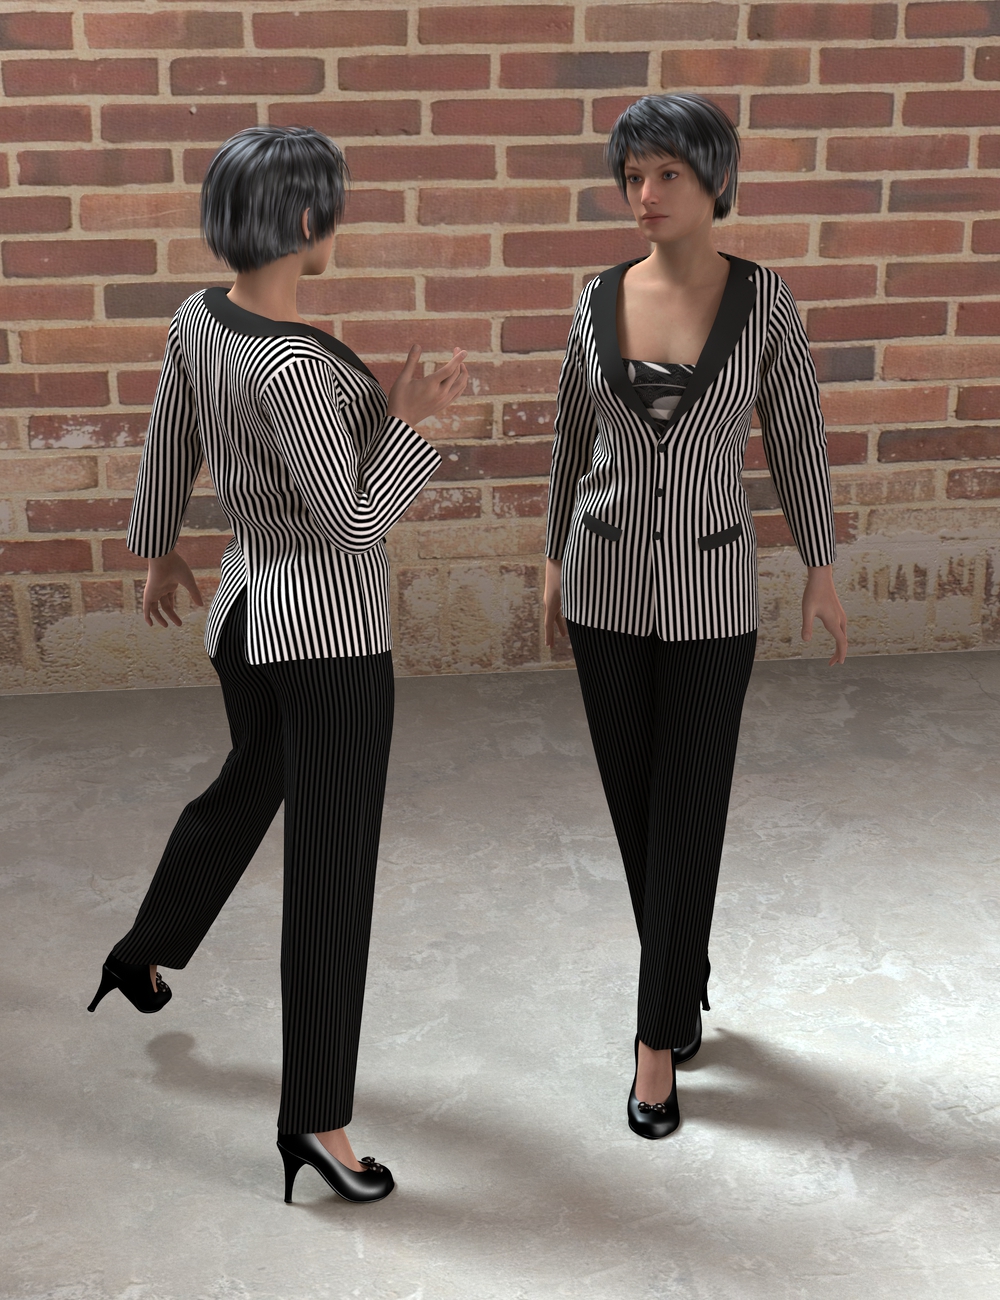 Ordinarily Three for Genesis 2 Female(s) by: Aave Nainen, 3D Models by Daz 3D